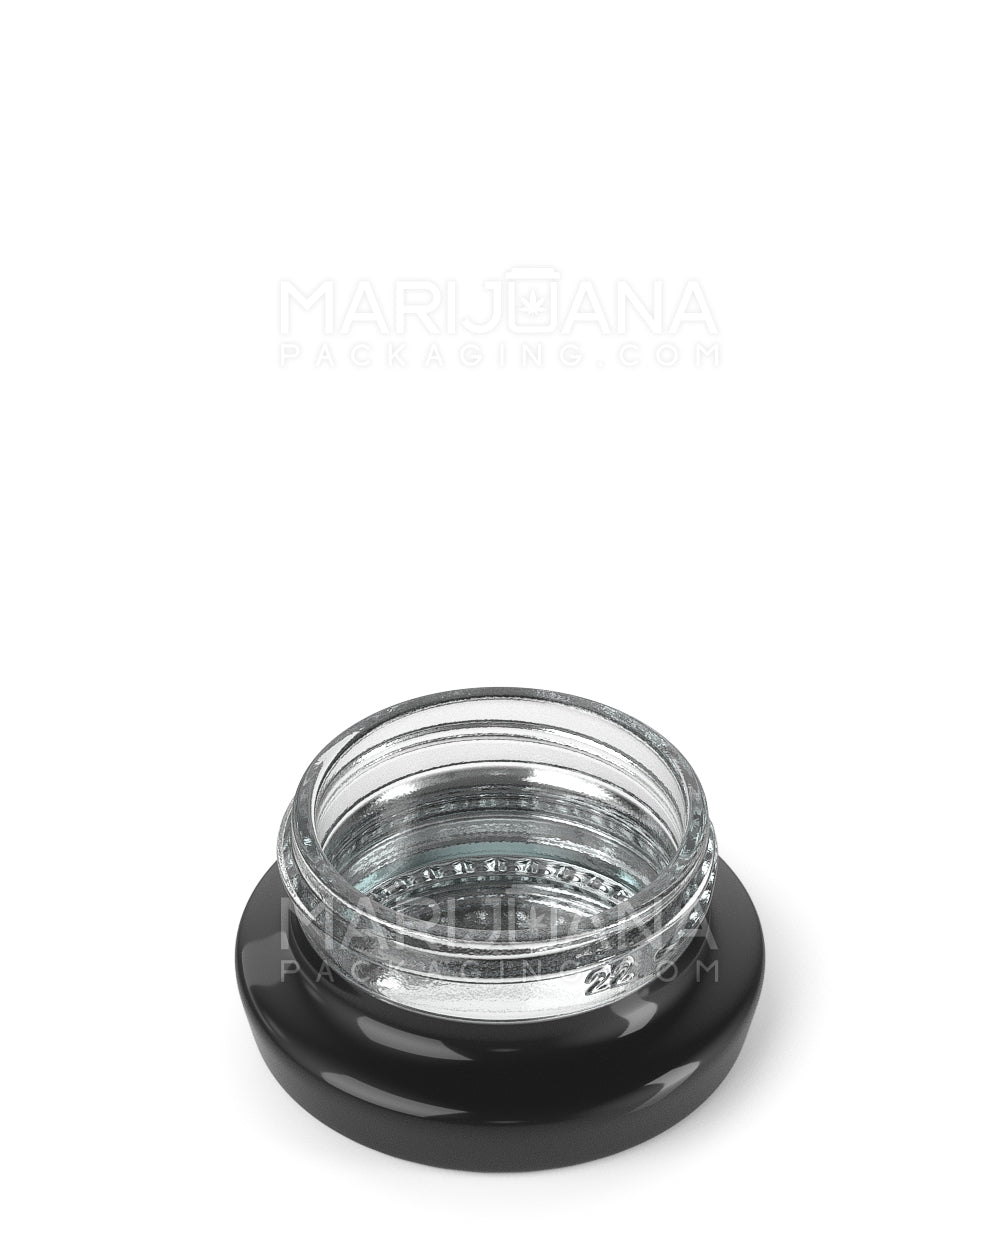 Black Glass Concentrate Containers | 38mm - 9mL - 240 Count